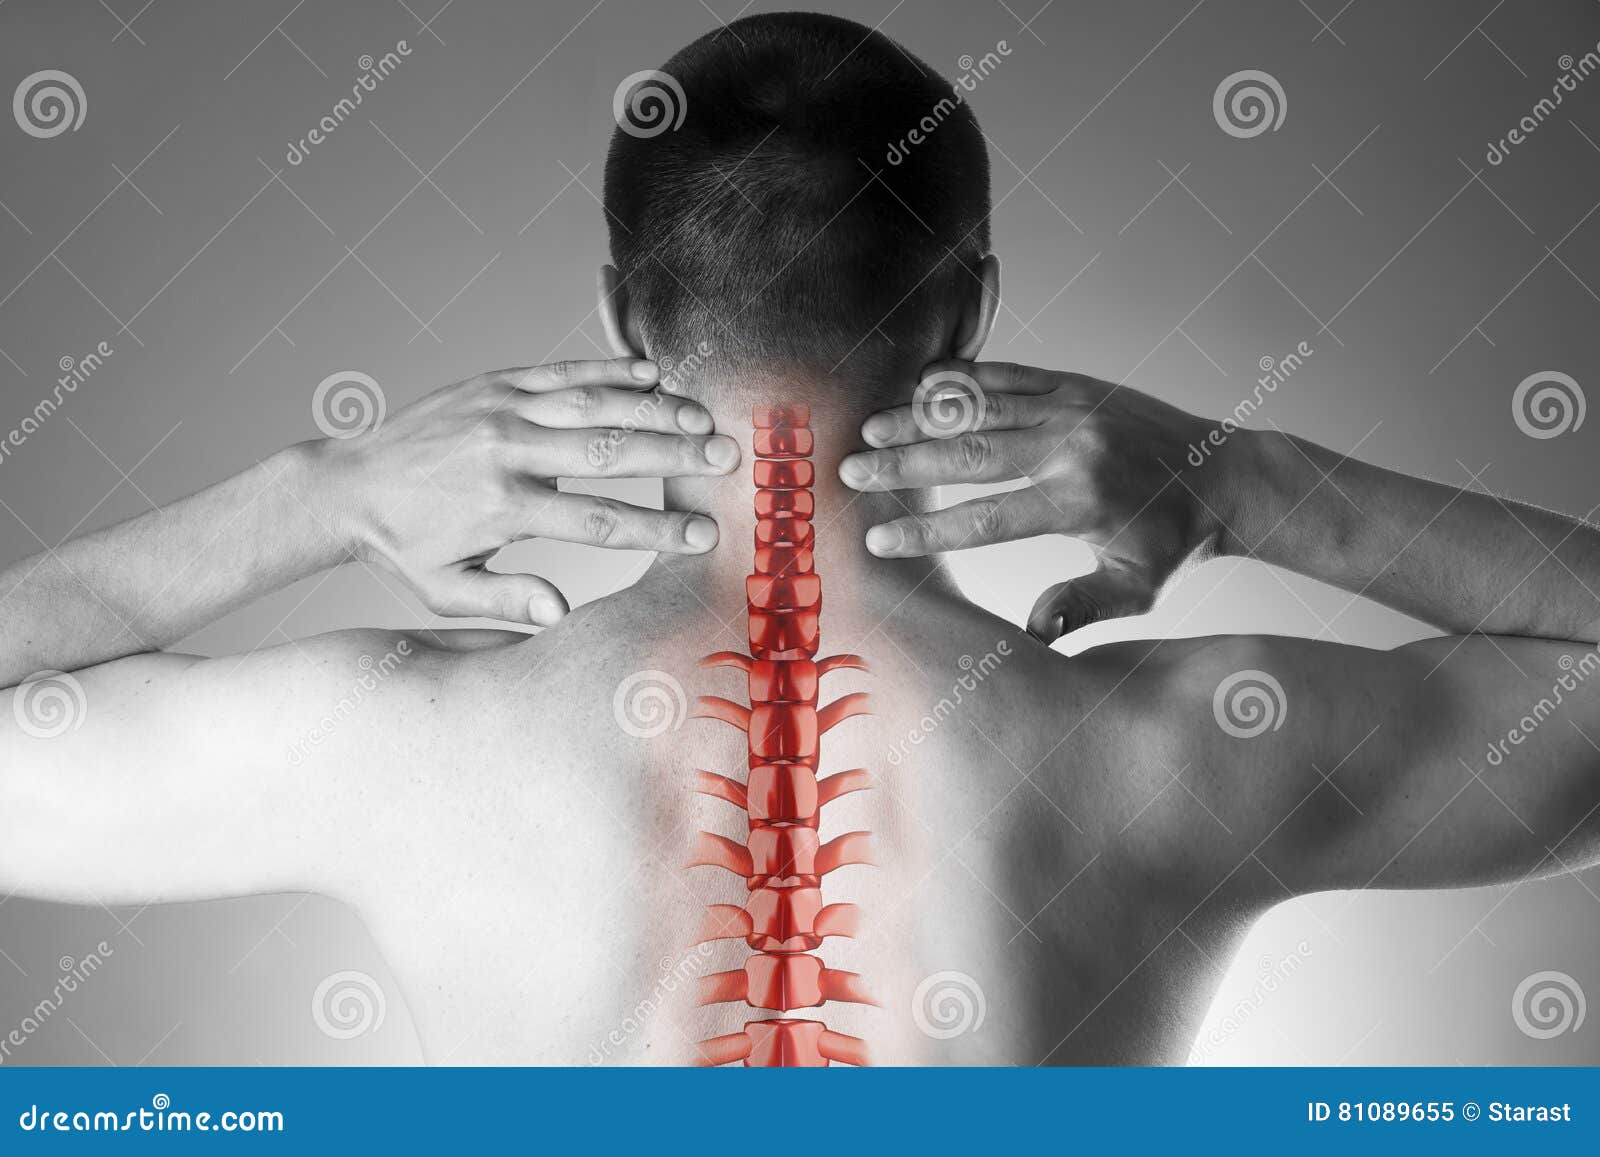 spine pain, man with backache and ache in the neck, black and white photo with red backbone